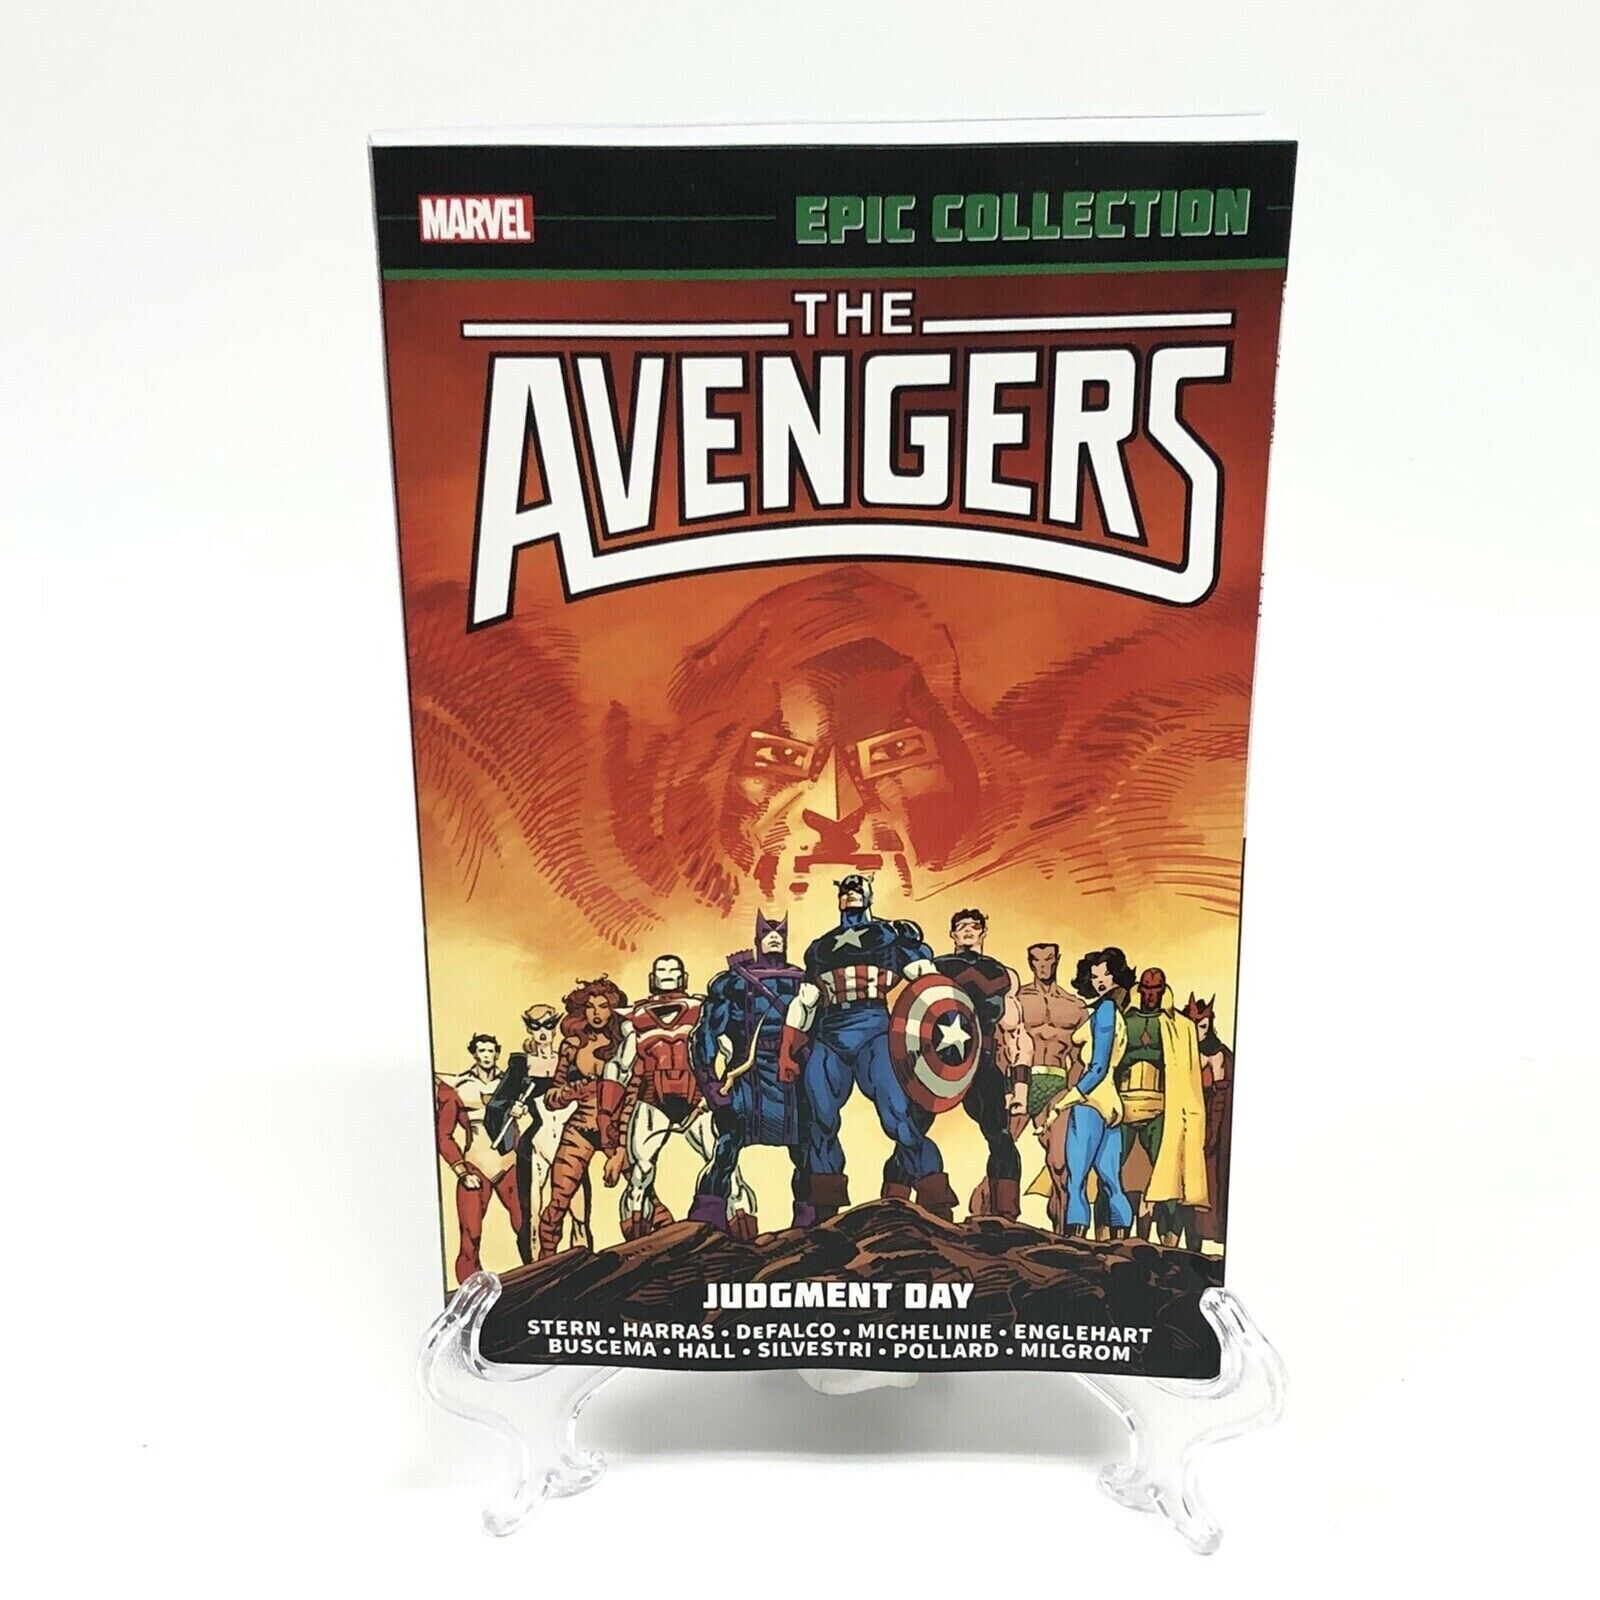 Avengers Epic Collection V17 Judgement Day New Printing Marvel Comics TPB 